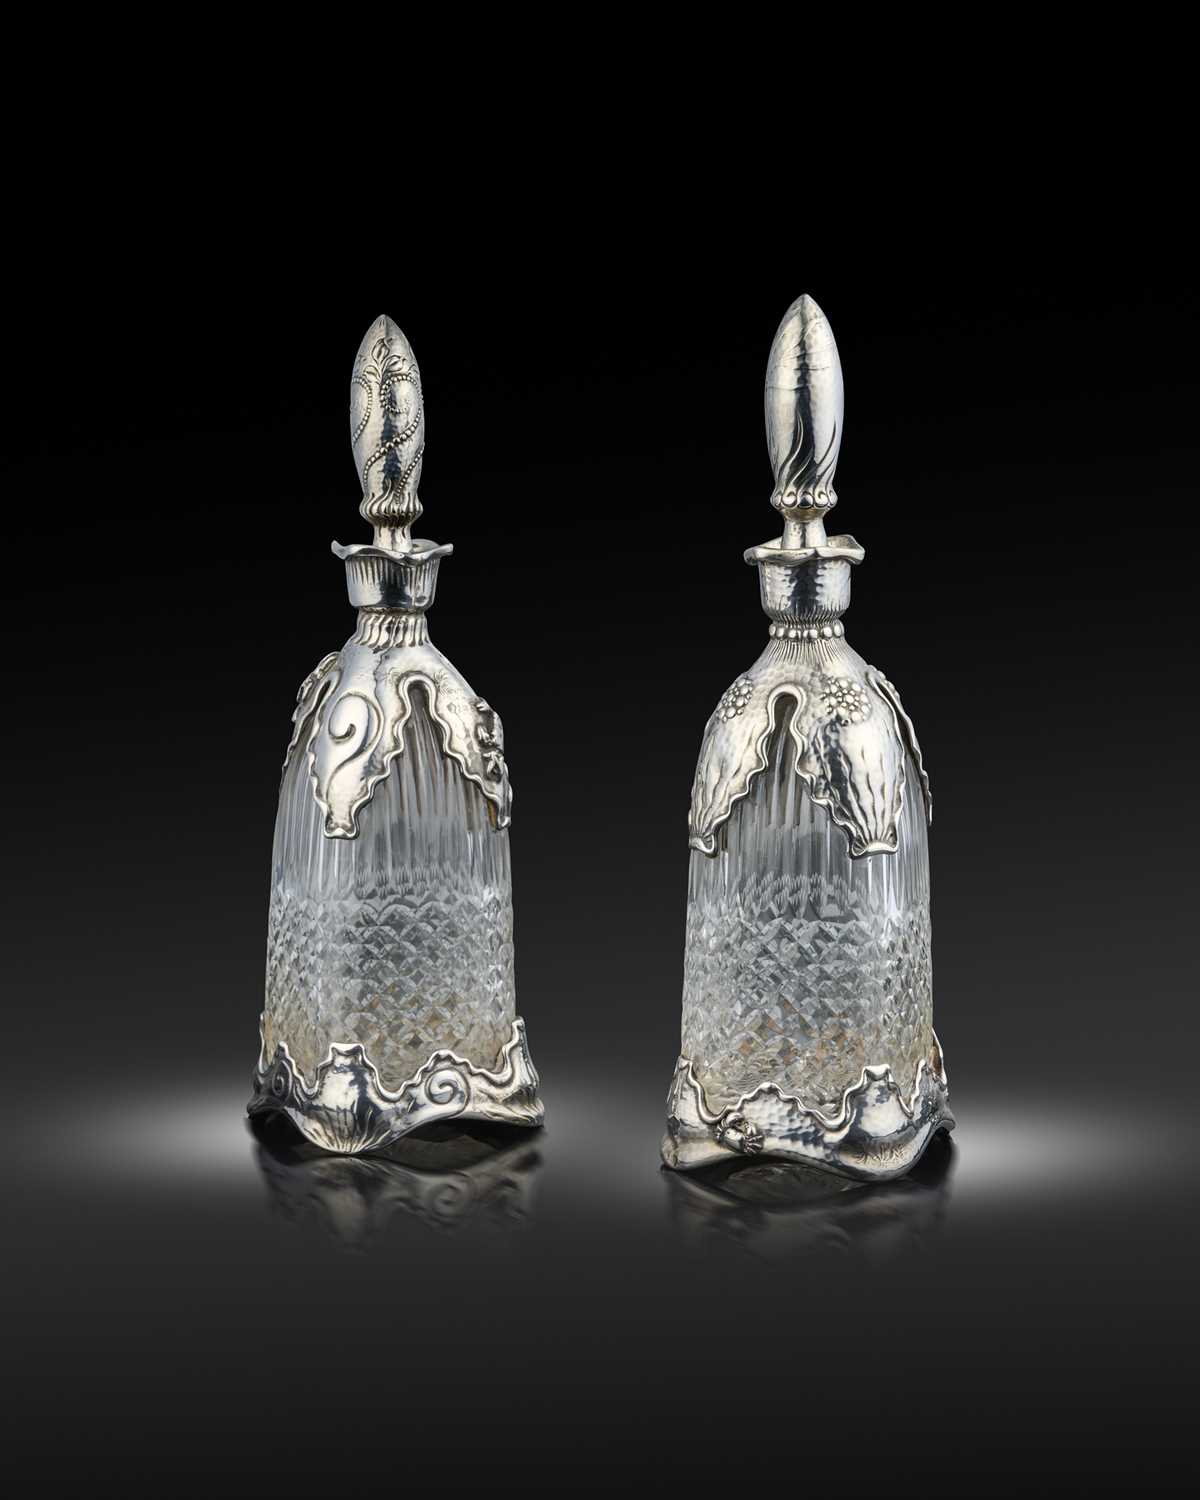 By Tiffany & Co., a similar pair of late-19th century American silver-mounted glass decanters,